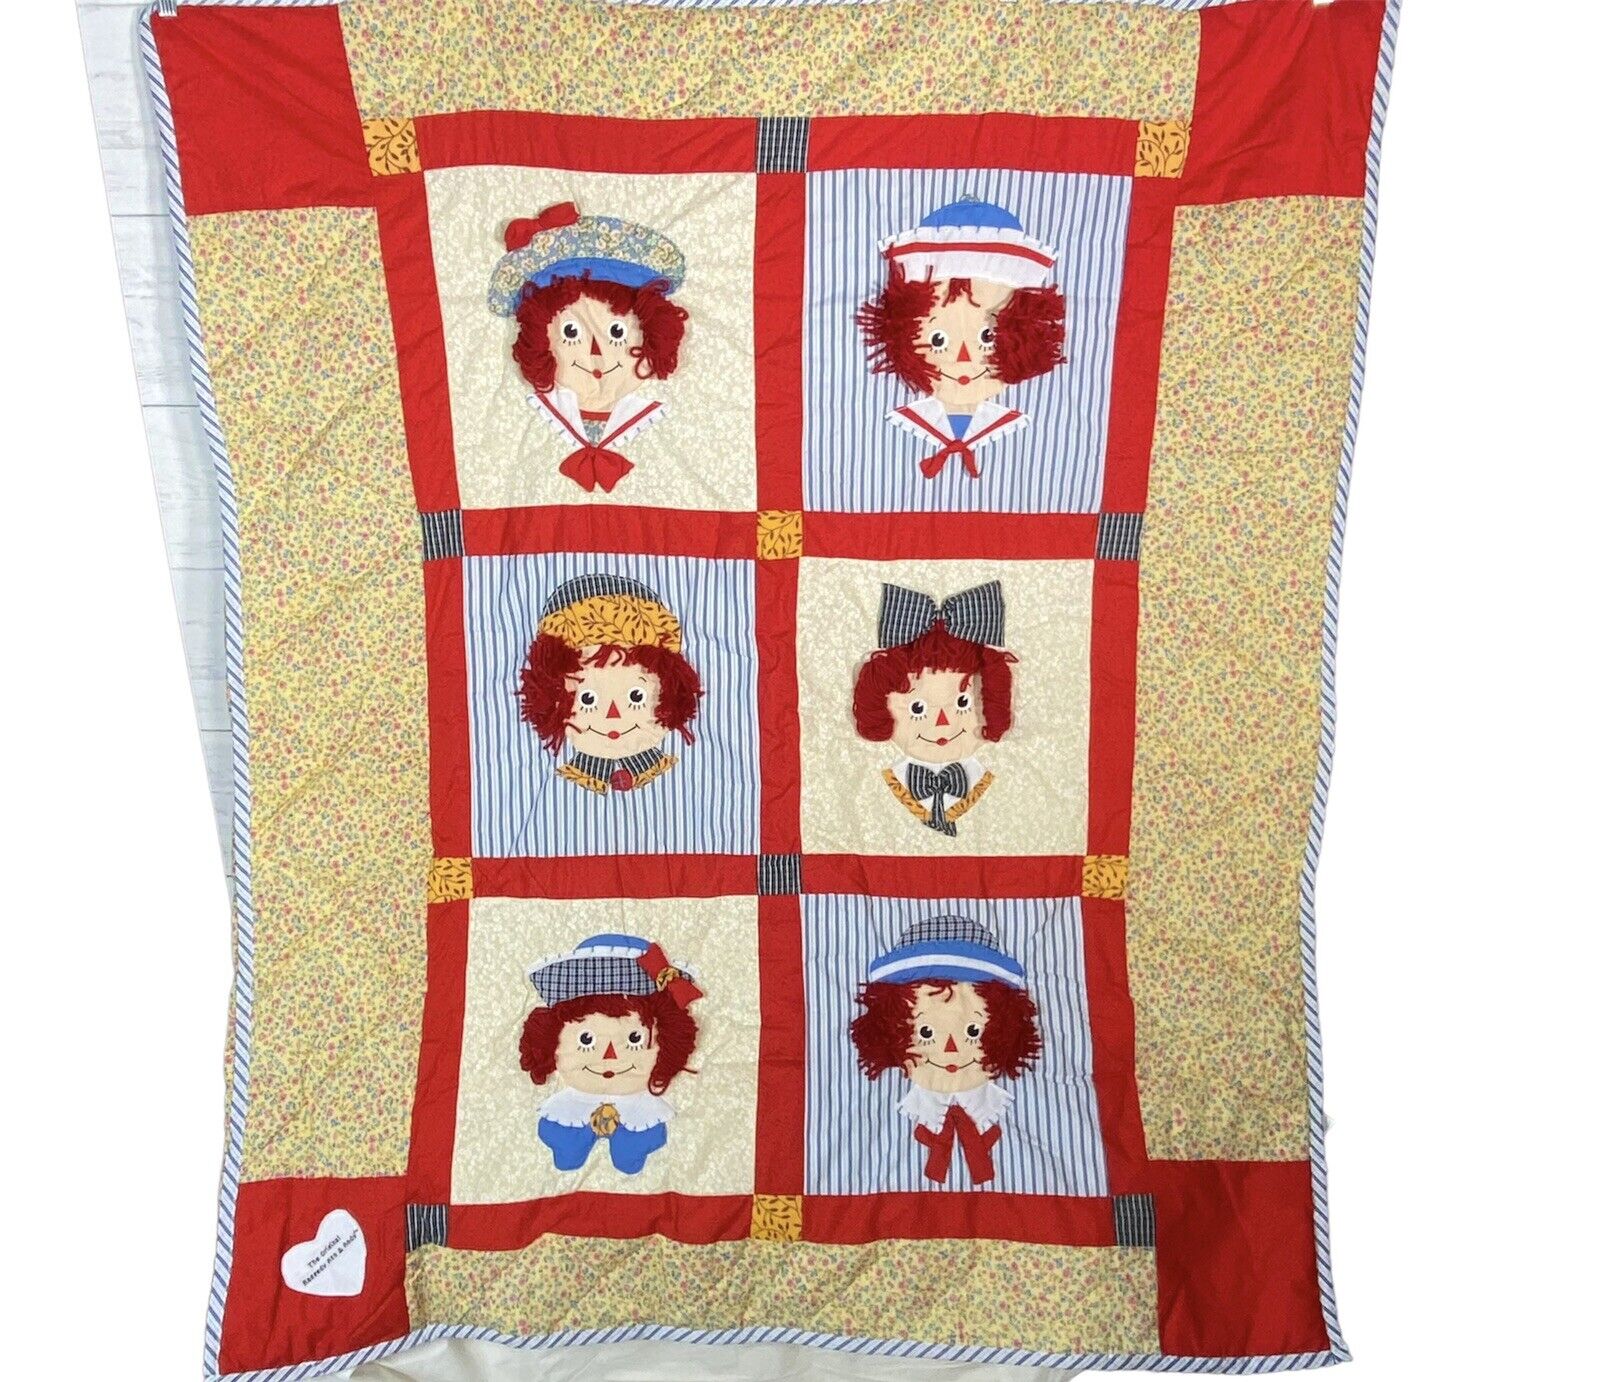 New Applause Raggedy Ann & Andy Appliqué Quilt 46” X 54”